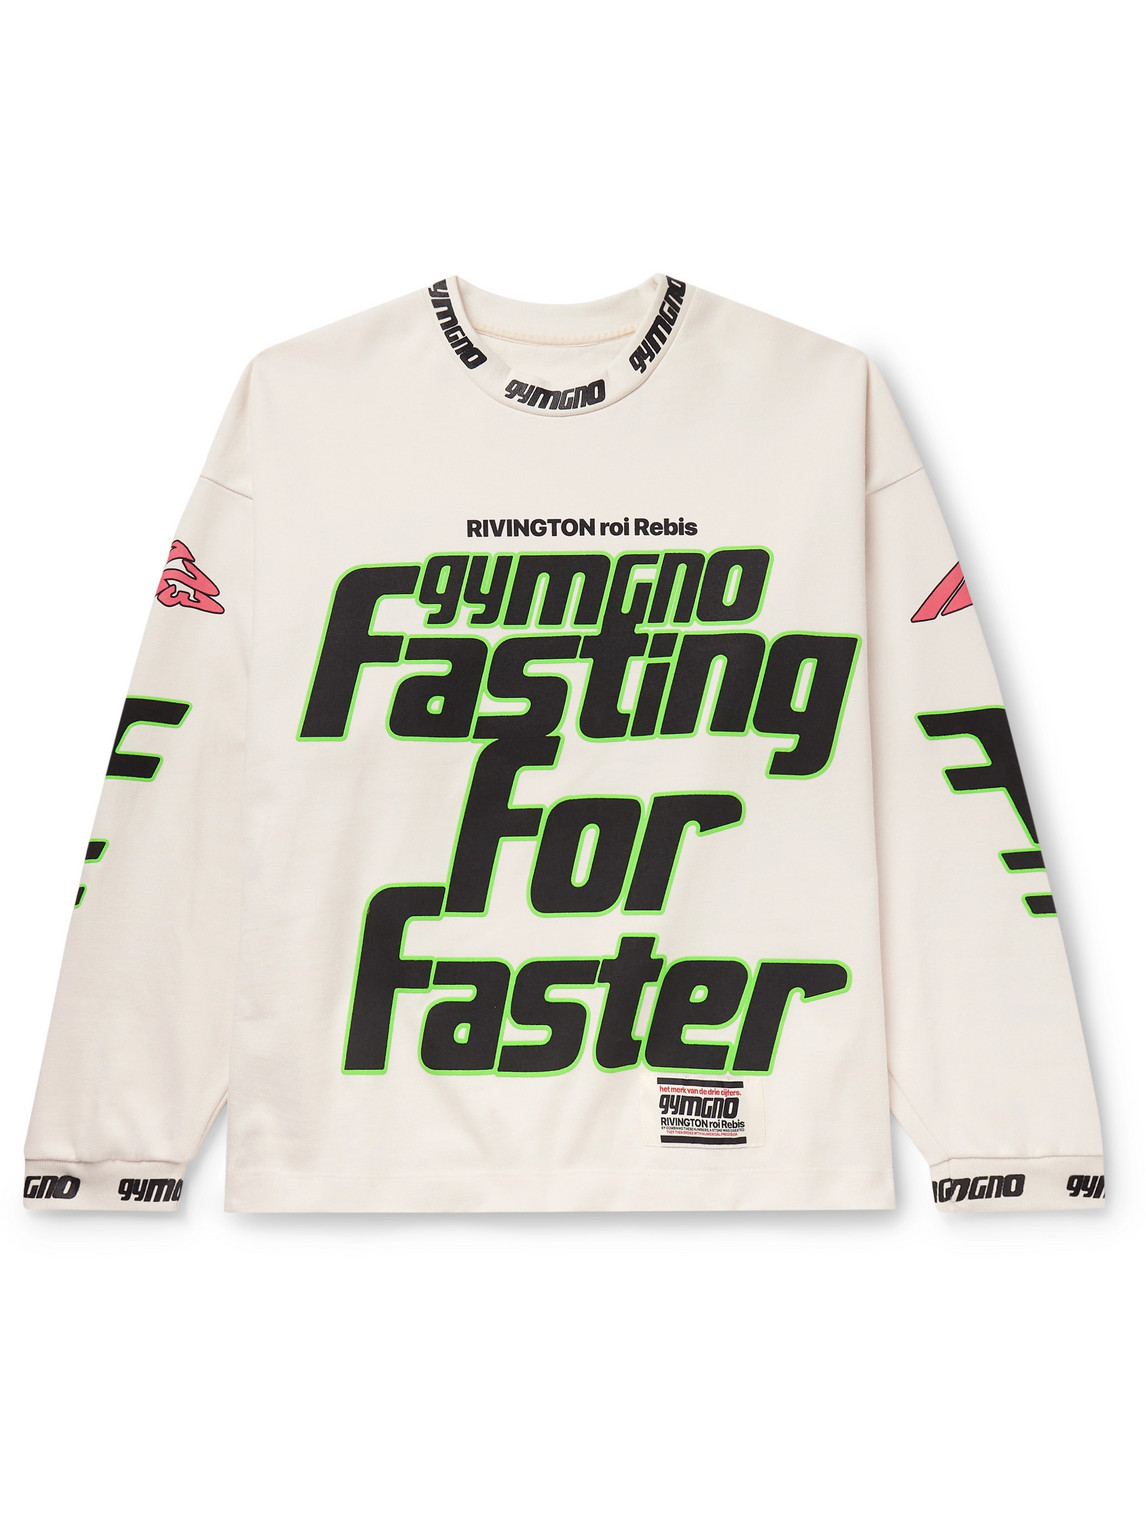 Fasting for Faster Oversized Printed Appliquéd Cotton-Jersey Sweatshirt